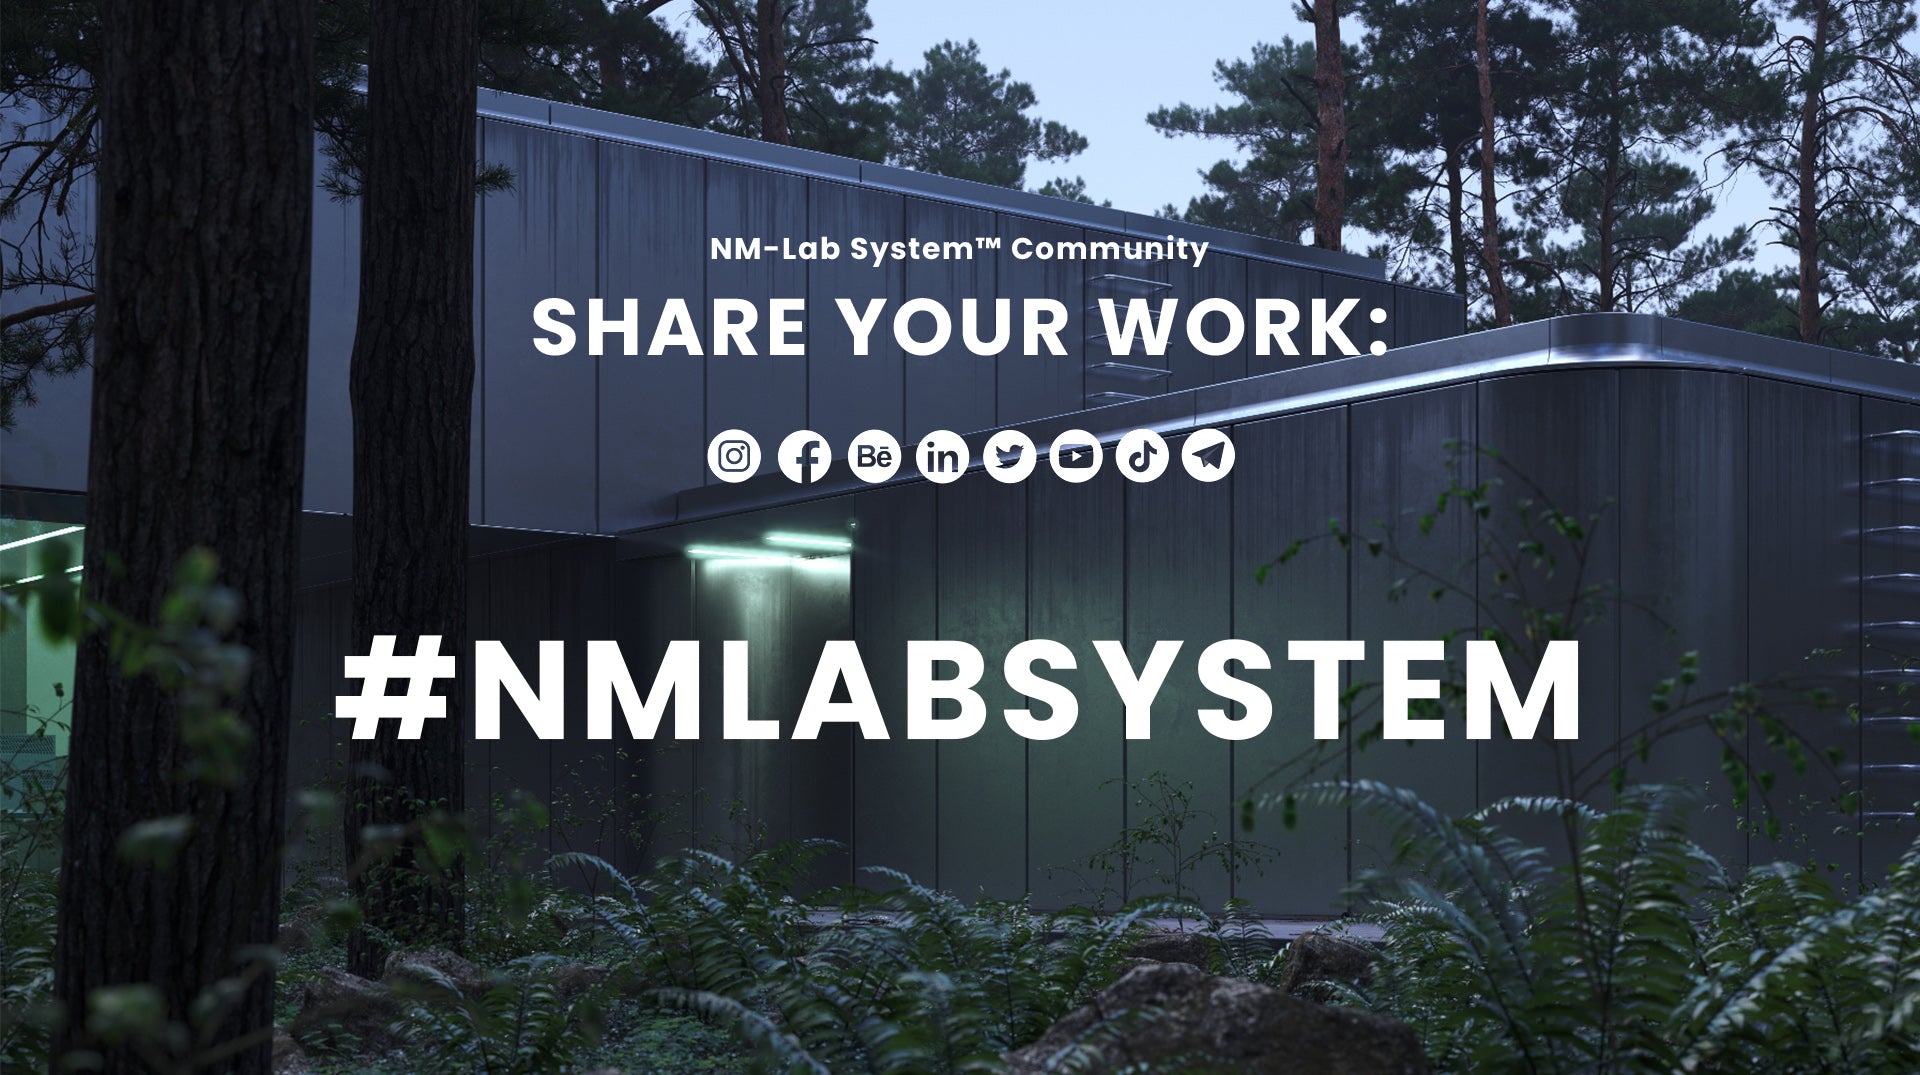 Share your work with #NMLABSYSTEM